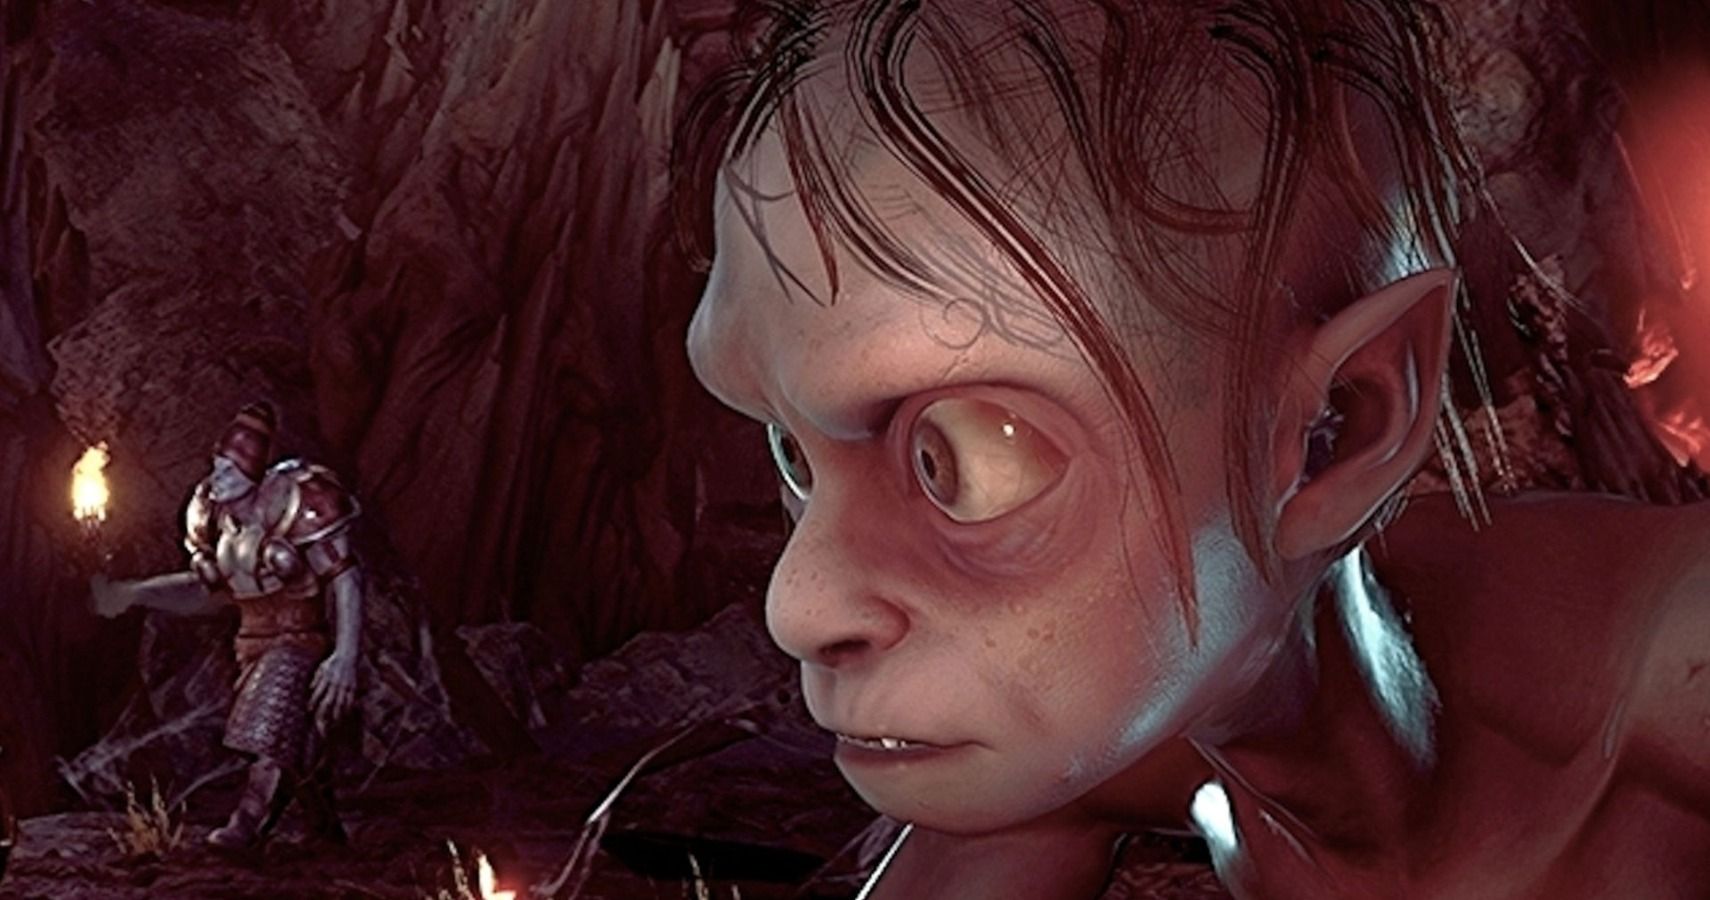 biblical meaning of gollum in the lord of the rings ovie